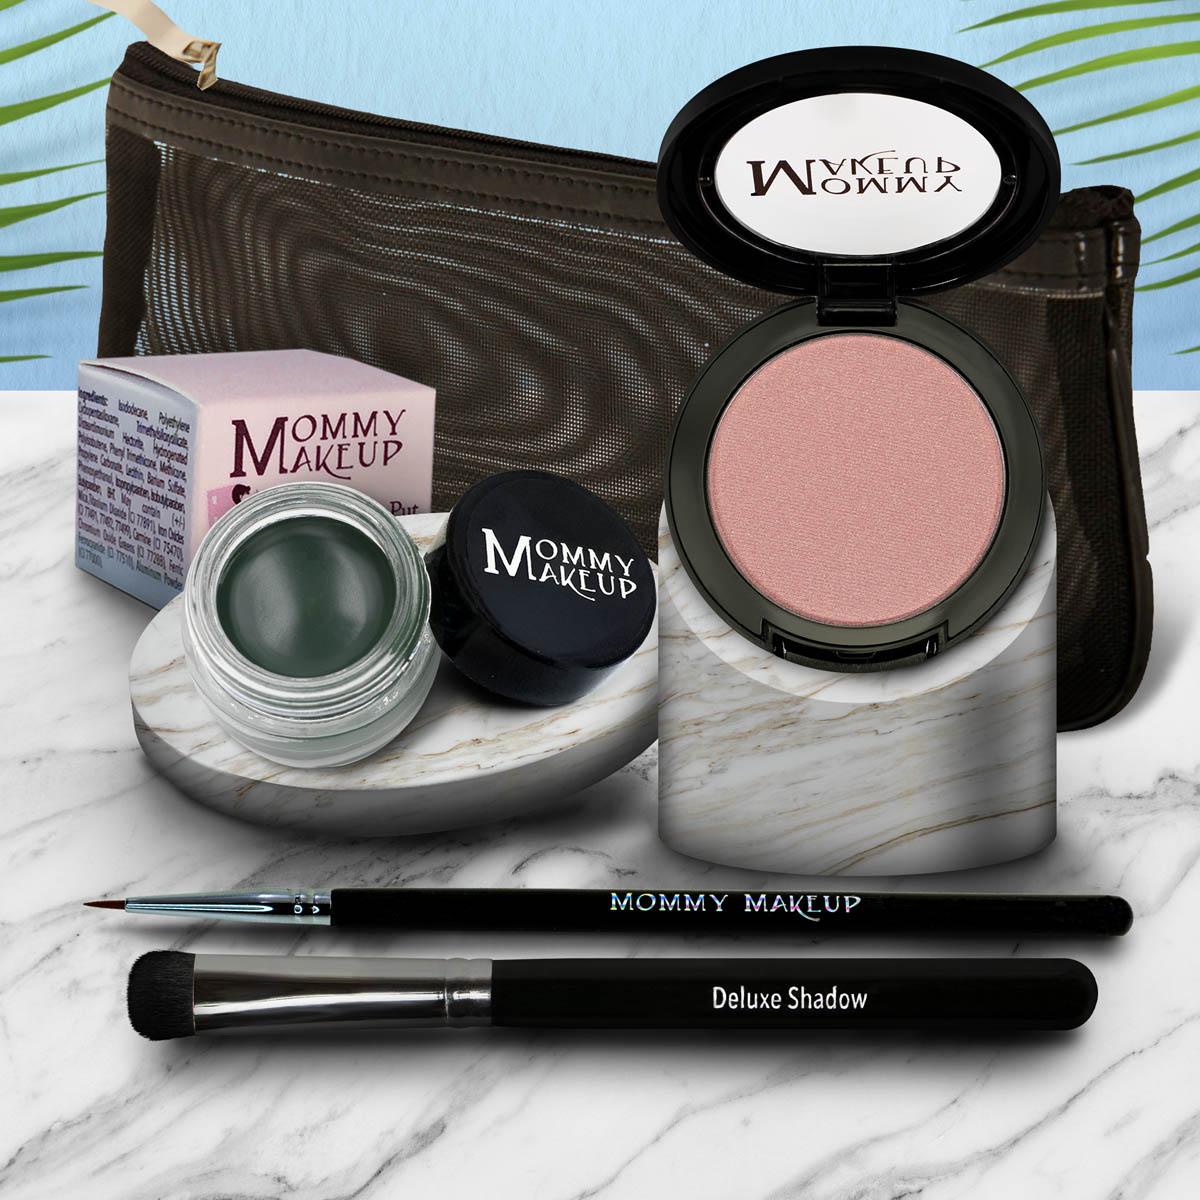 Create a long-wearing, glowing look for your eyes and entire face with the Eye Love It Set! A 5 piece talc-free makeup set that you can customize.